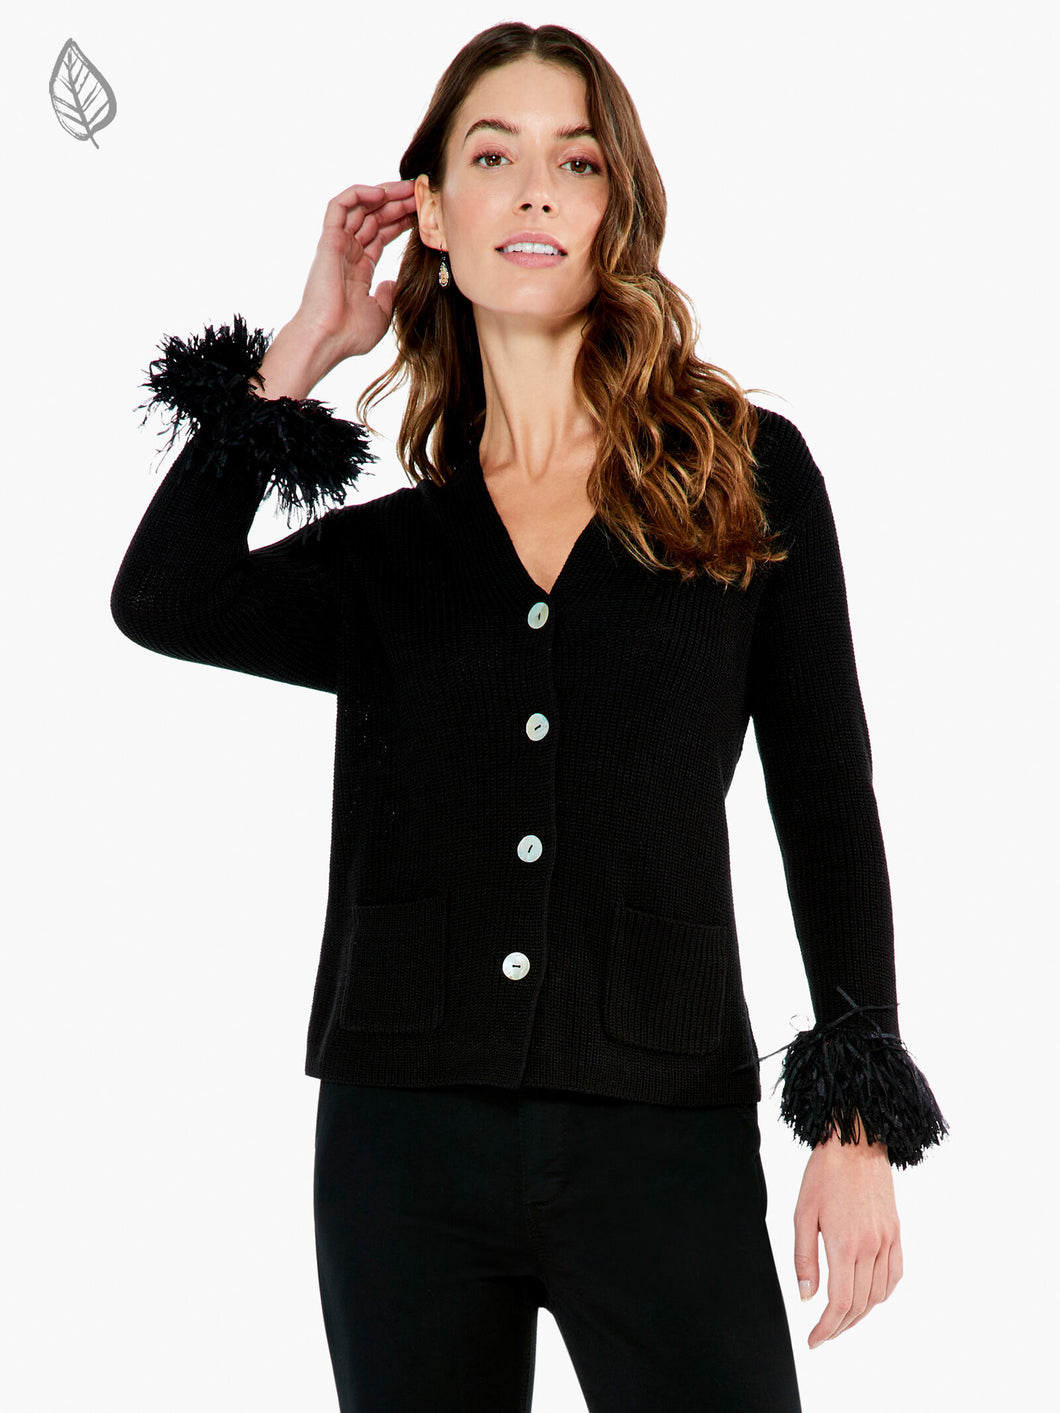 A timeless cardigan with a modern, romantic twist. Featuring intricate fringe detail on the sleeves, this cardigan is crafted of midweight knit fabric with a classic V-neckline and long sleeves with fringe cuffs. It has a regular fit and two patch pockets, finishing at the hip with a straight hemline. An elevated look that's anything but ordinary. Color- Nightfall (Black). Classic midweight knit fabrication. V-neckline. Long sleeves with fringe cuffs.  Regular fit.